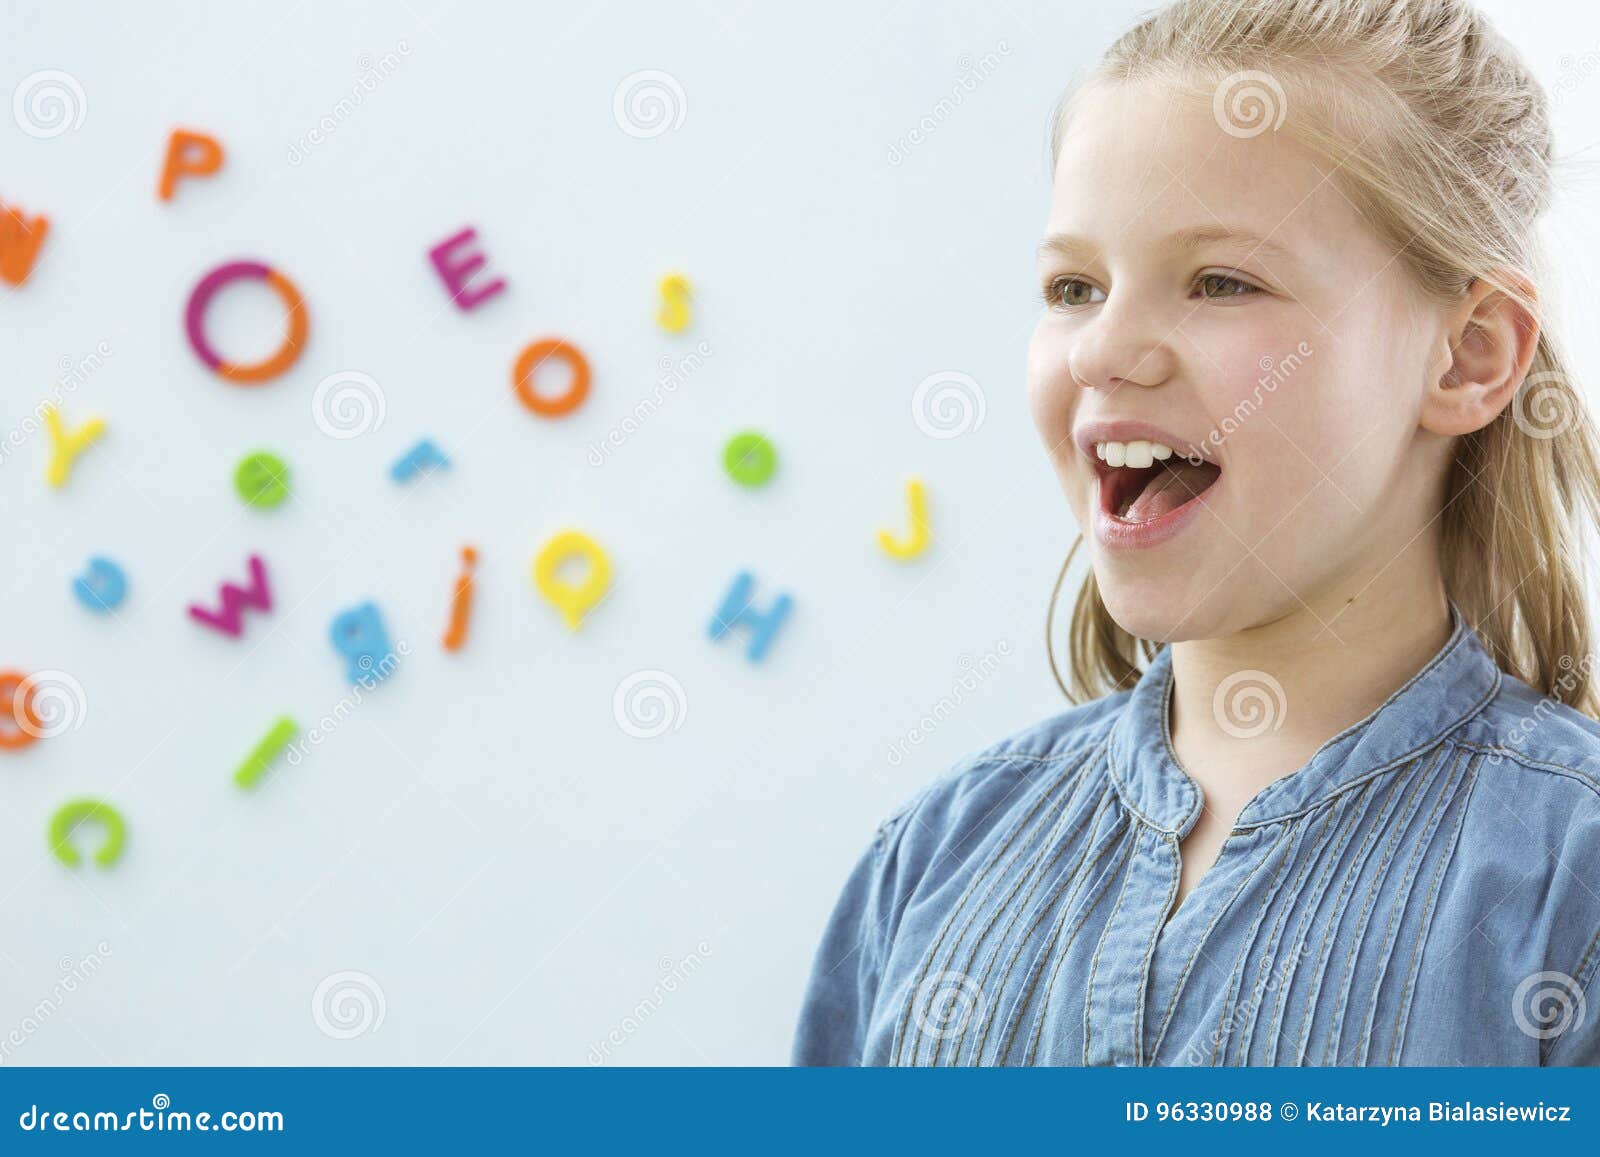 girl in speech therapy office